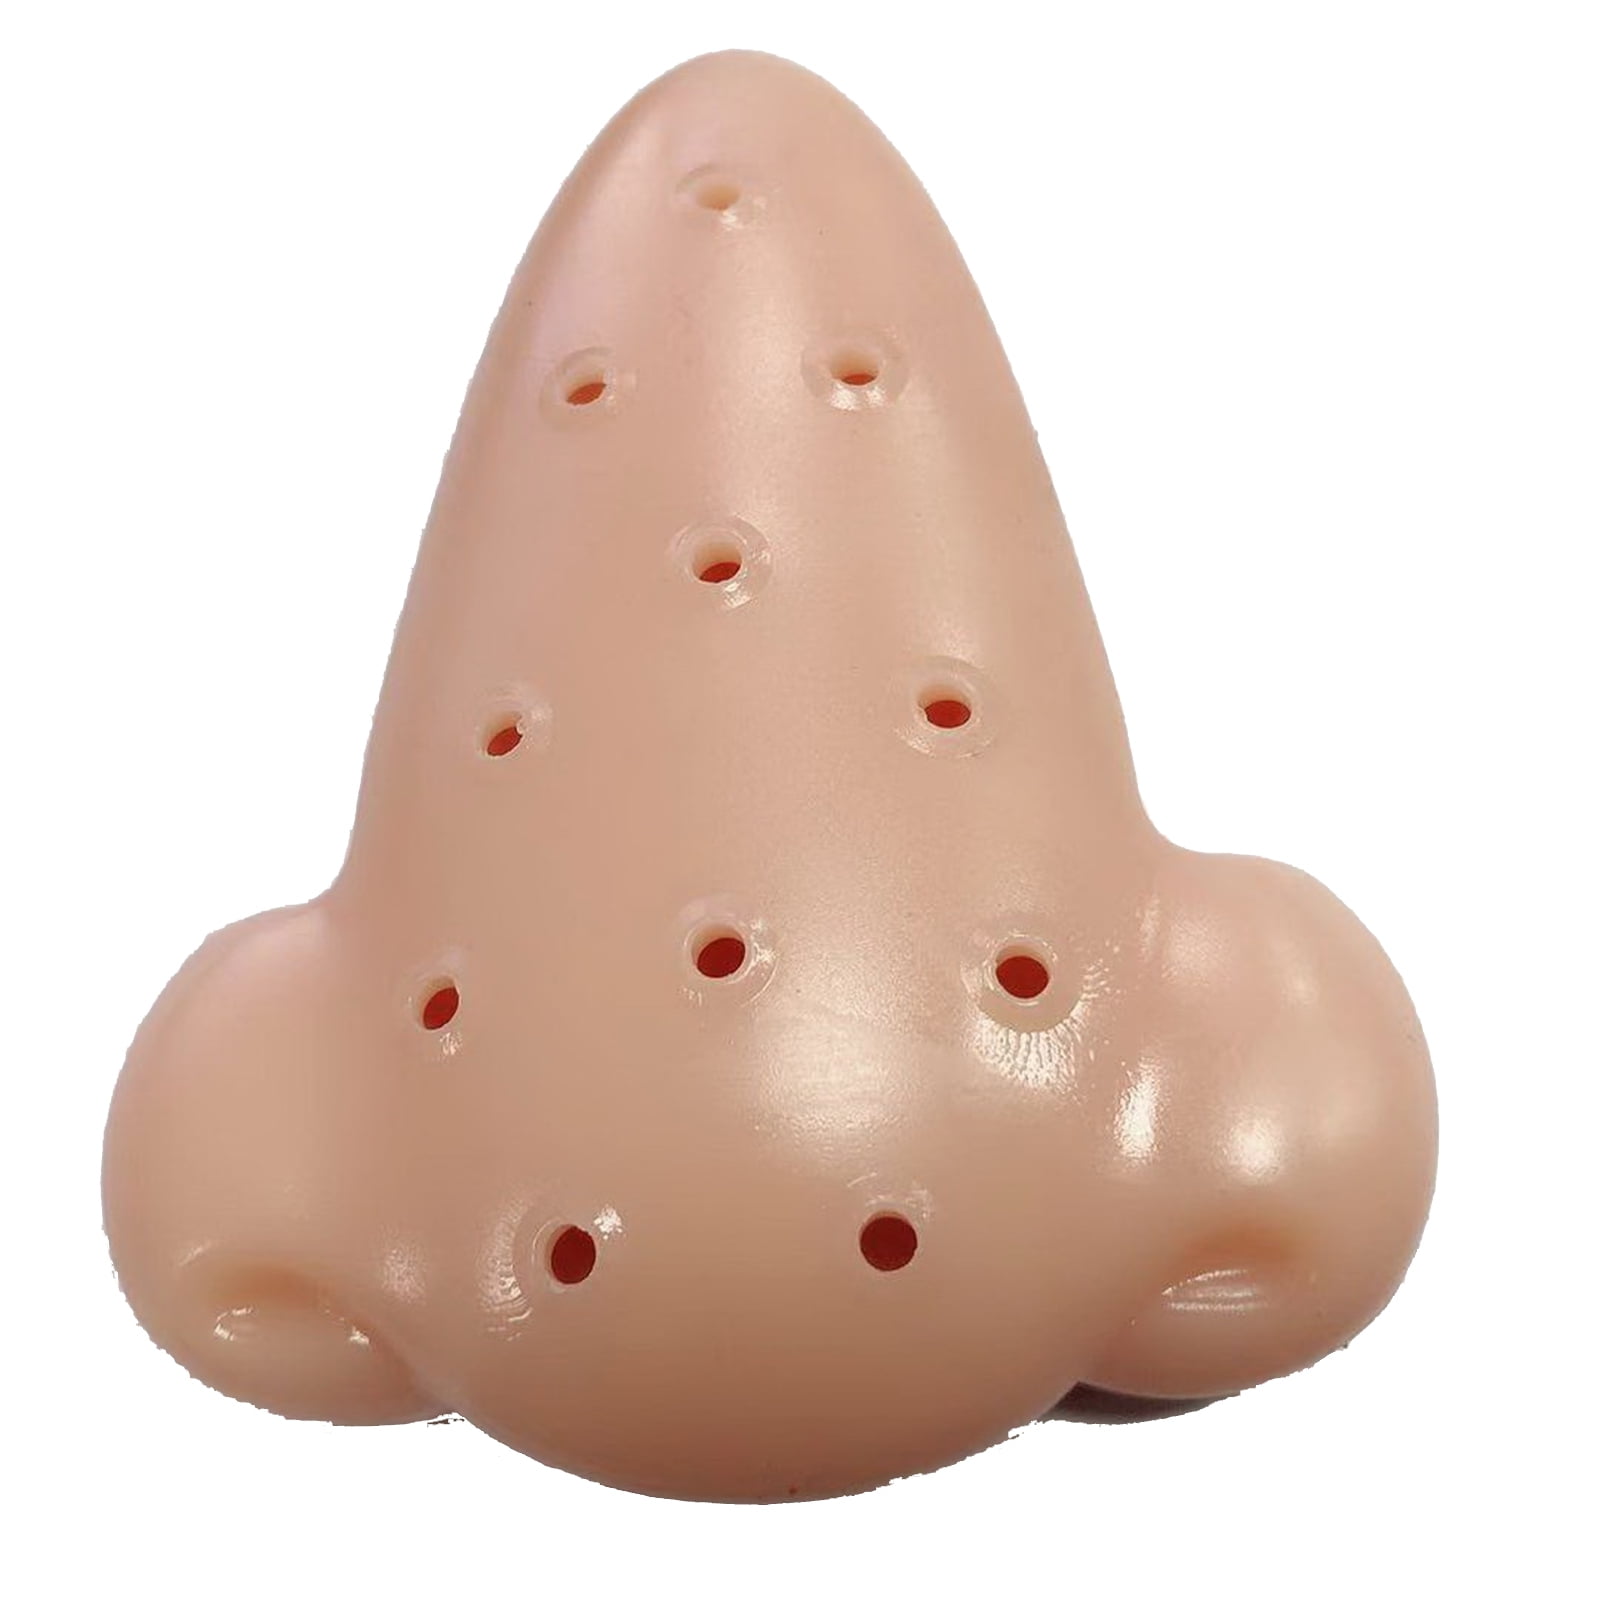 Funny Toy Simulated Acne Squeeze Pimple Nose Stress Relief E0G0 